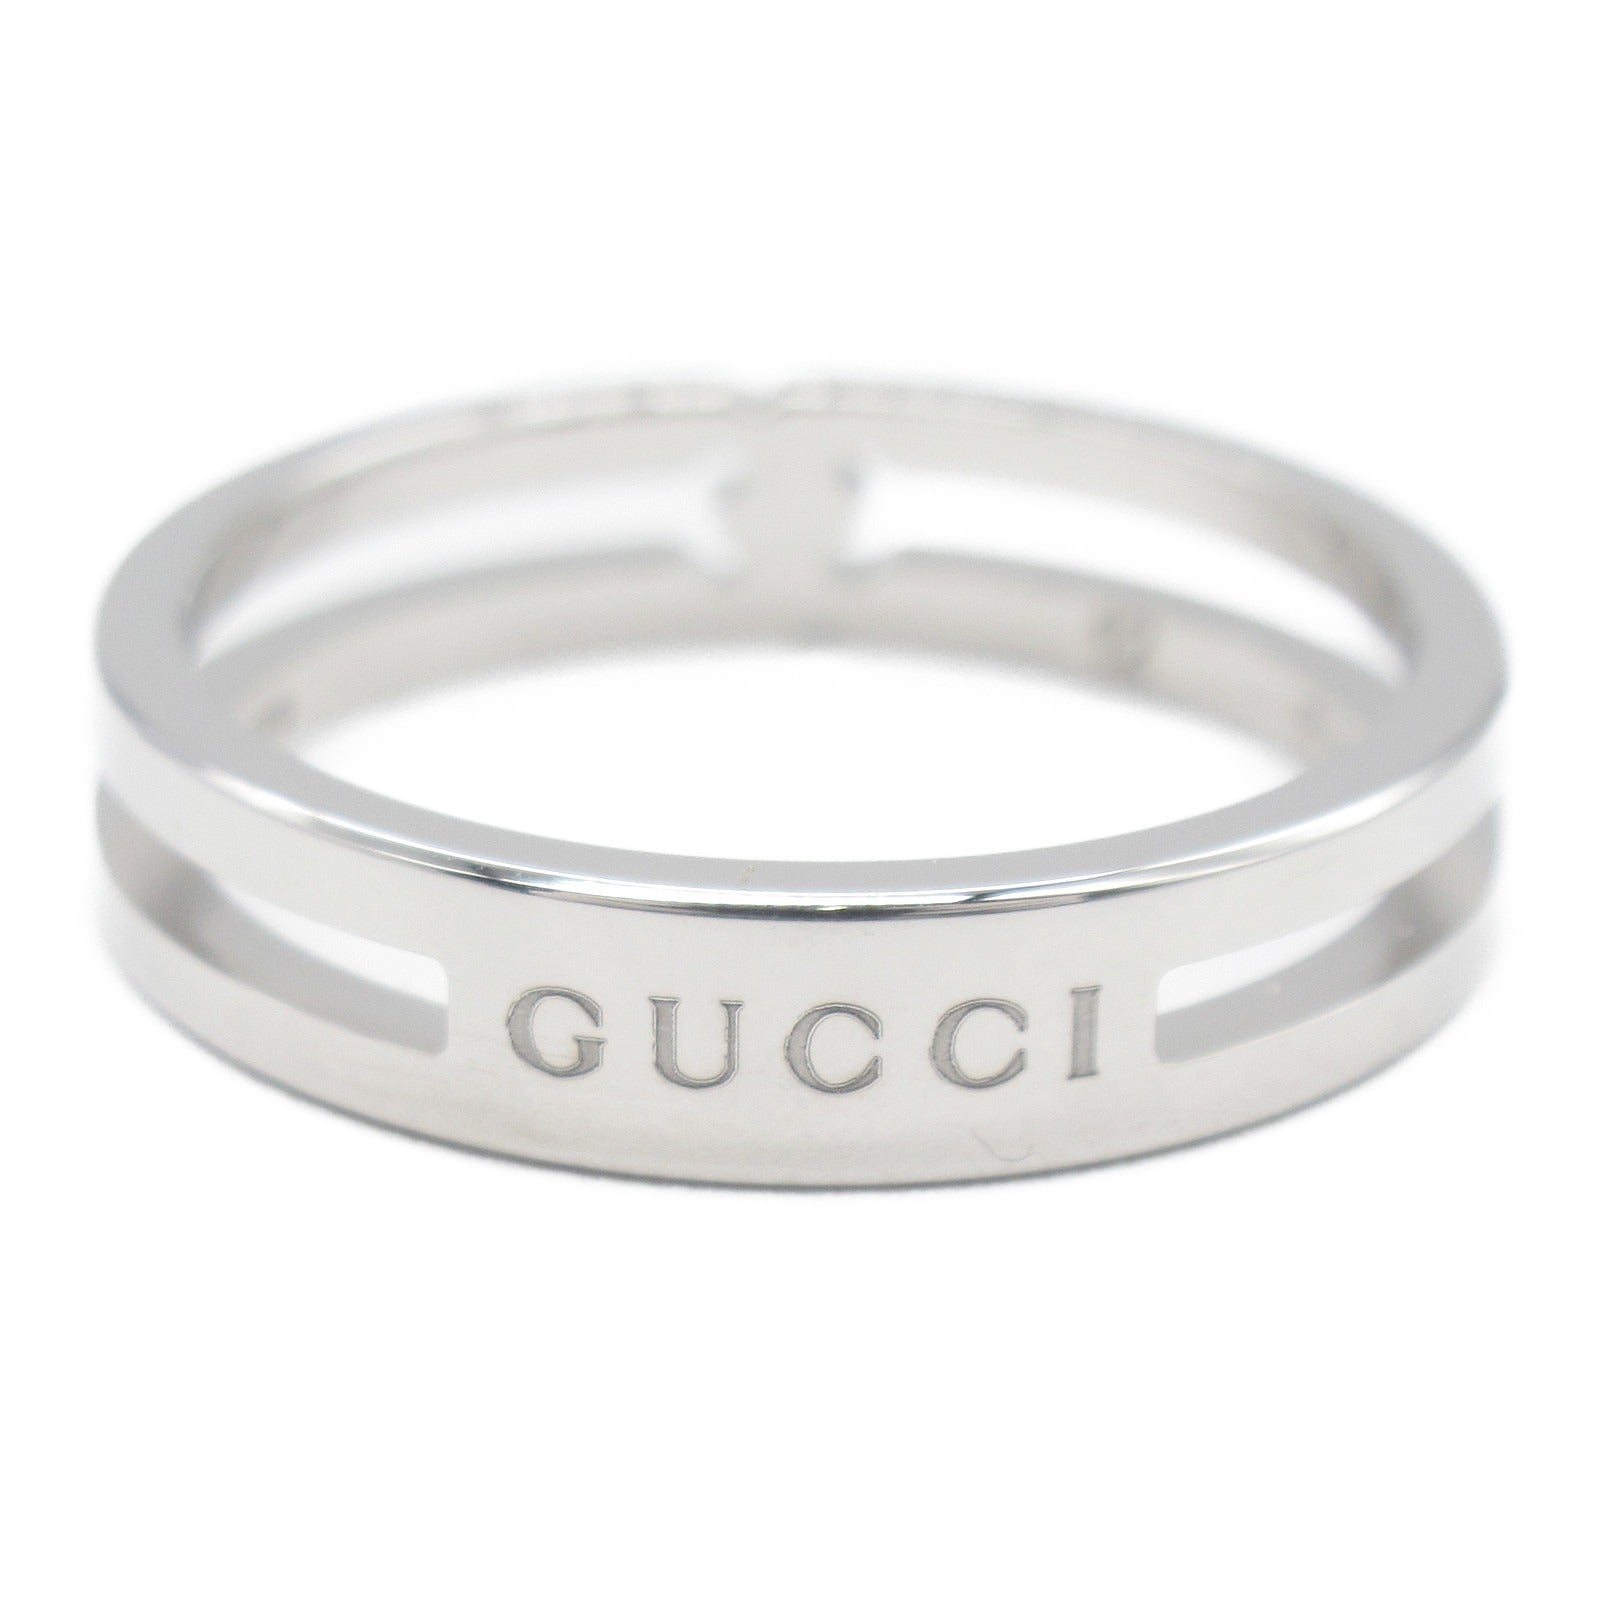 Gucci Infinity Ring Ring Jewelry K18WG (White G)   Silver